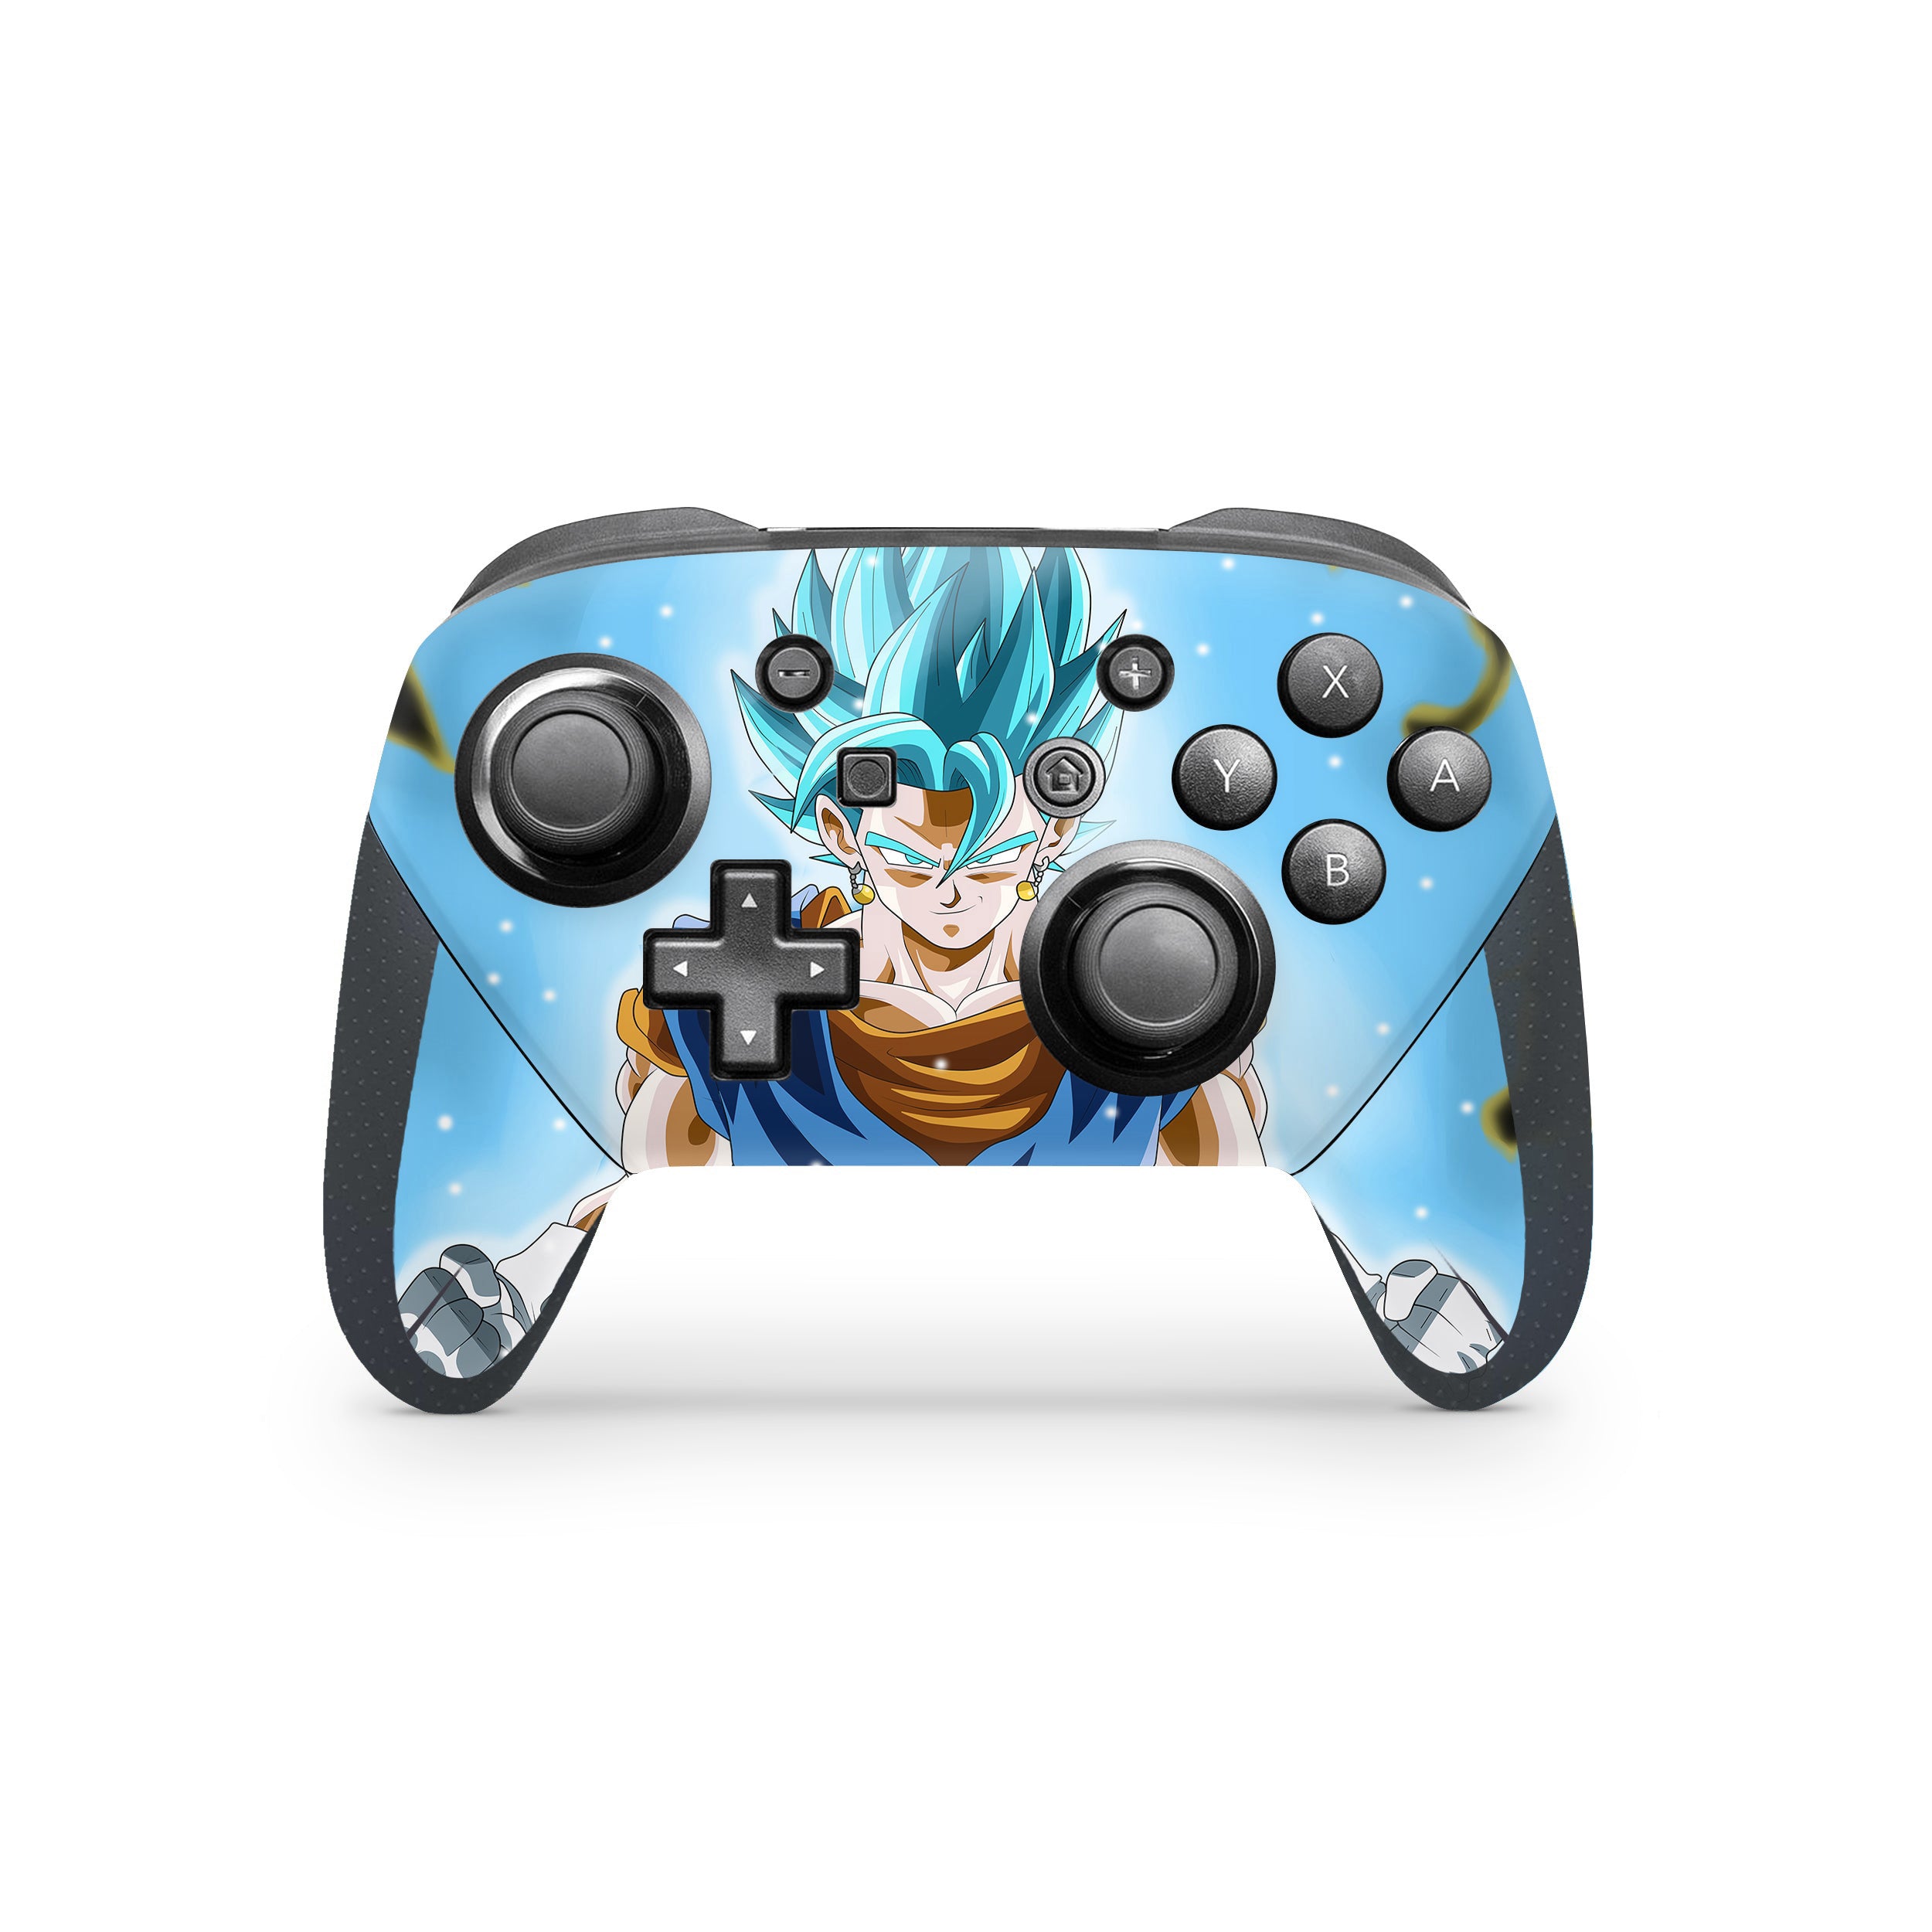 A video game skin featuring a Dragon Ball Super Vegito design for the Switch Pro Controller.